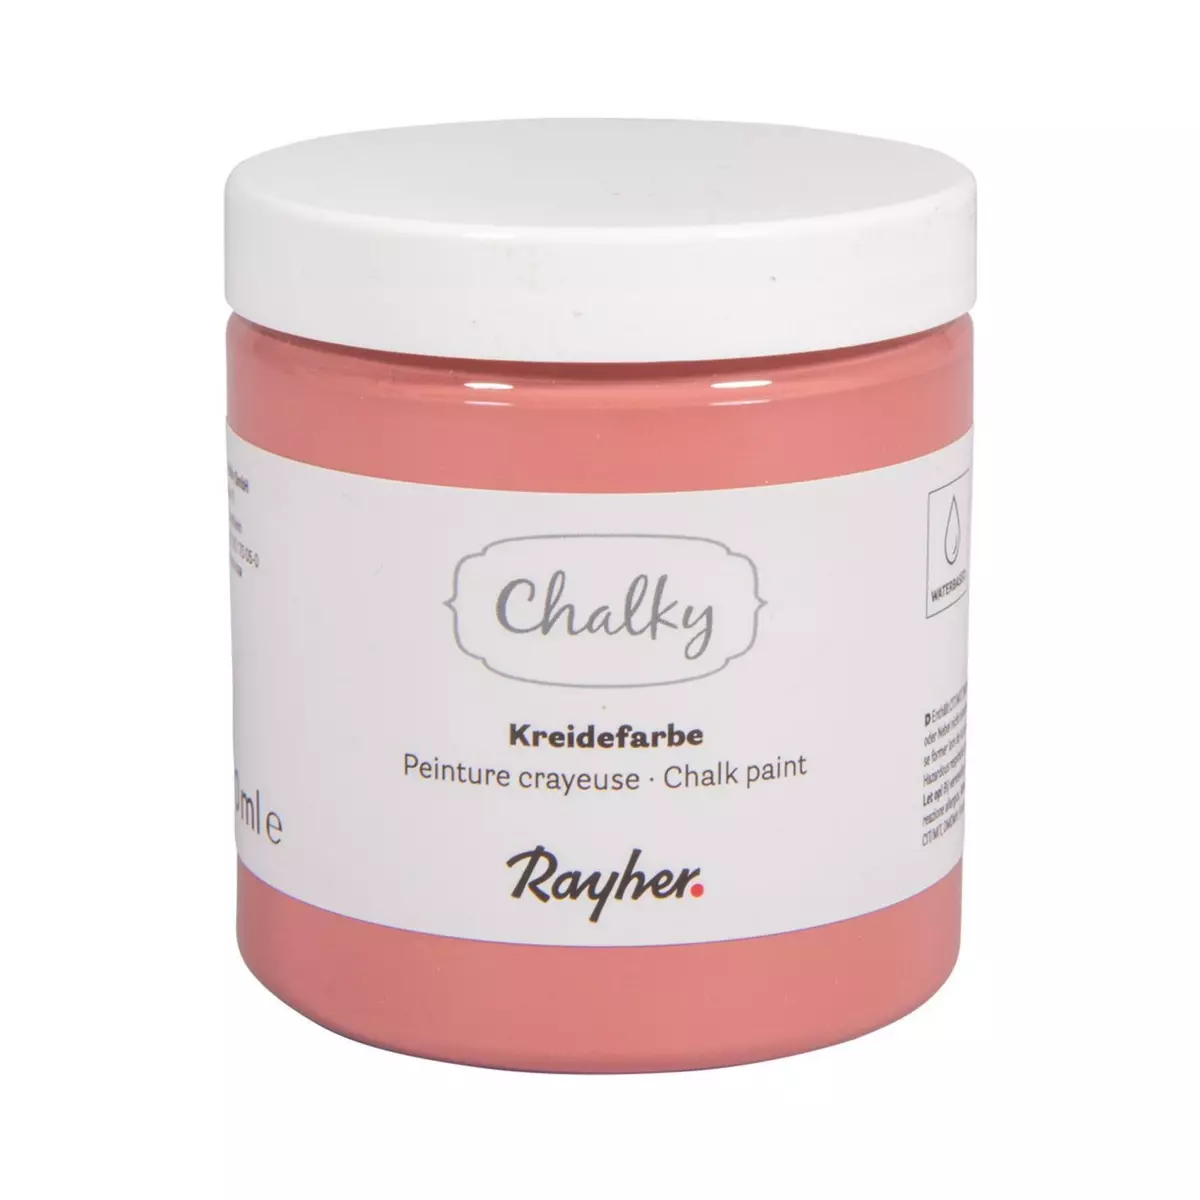 Rayher Peinture Craie Rouge tuile - Chalky Finish - 230 ml